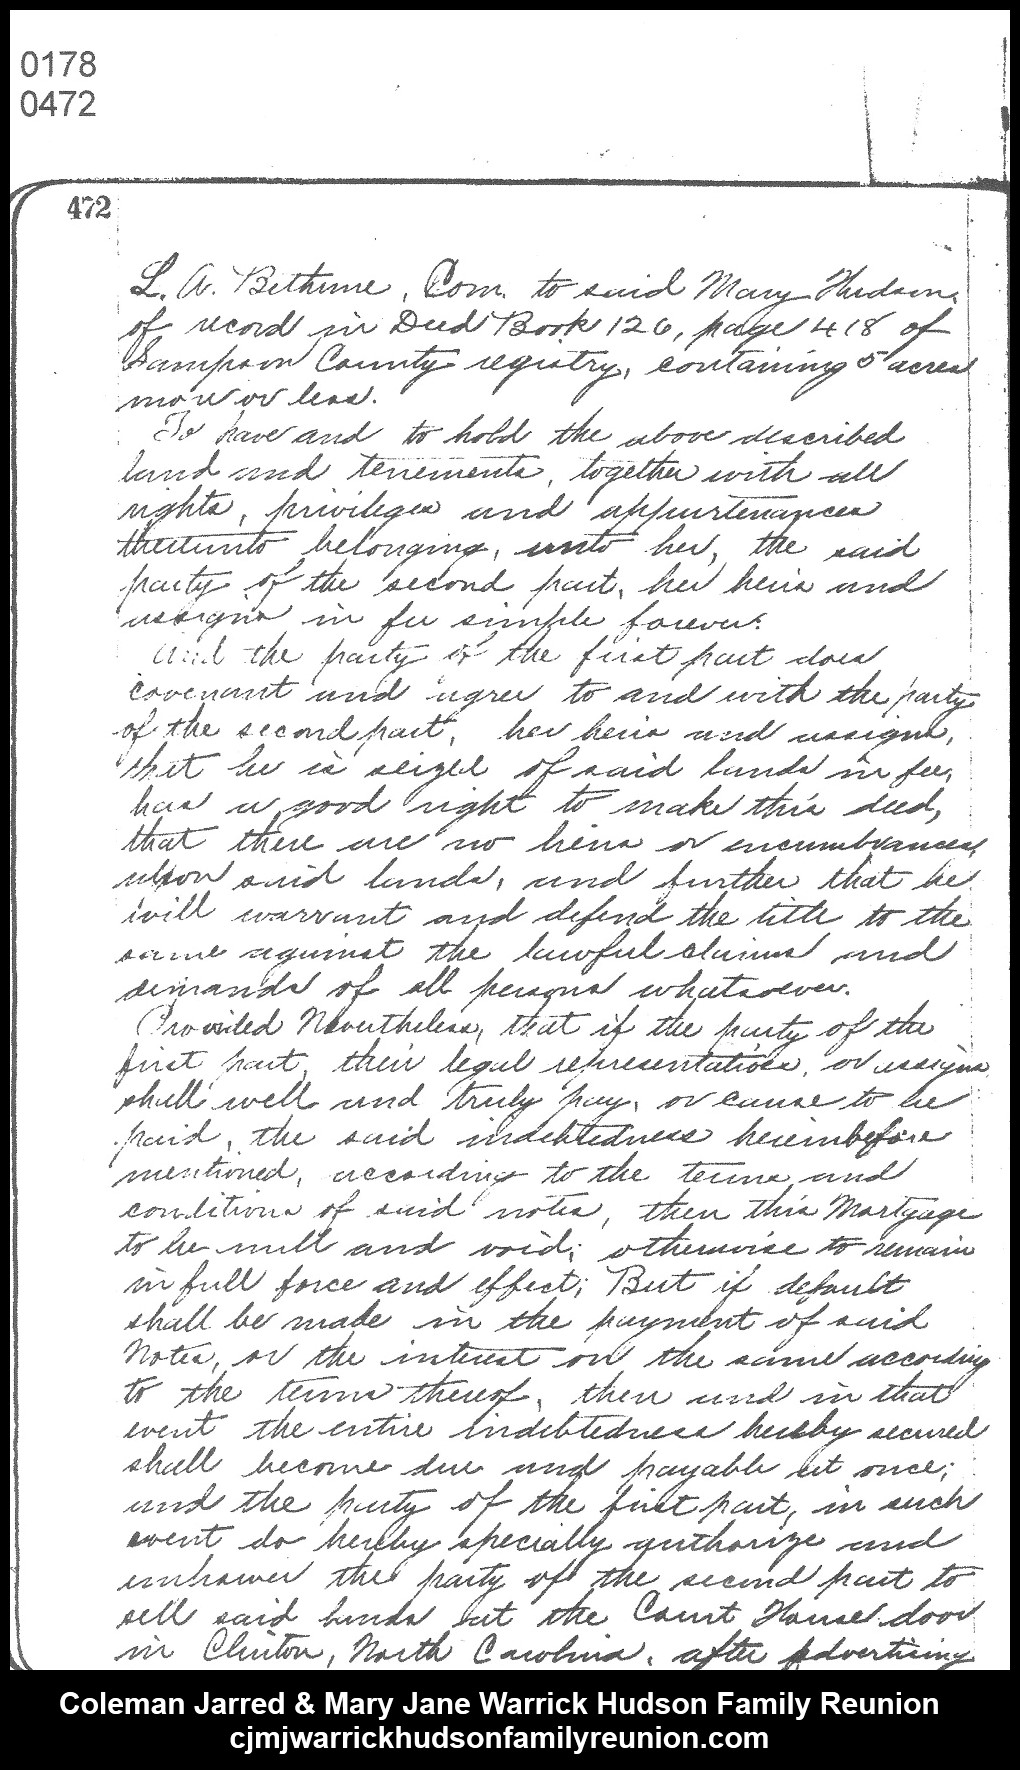 1909, 11-24 - Deed - George W. King to MJ (page 2 of 3)